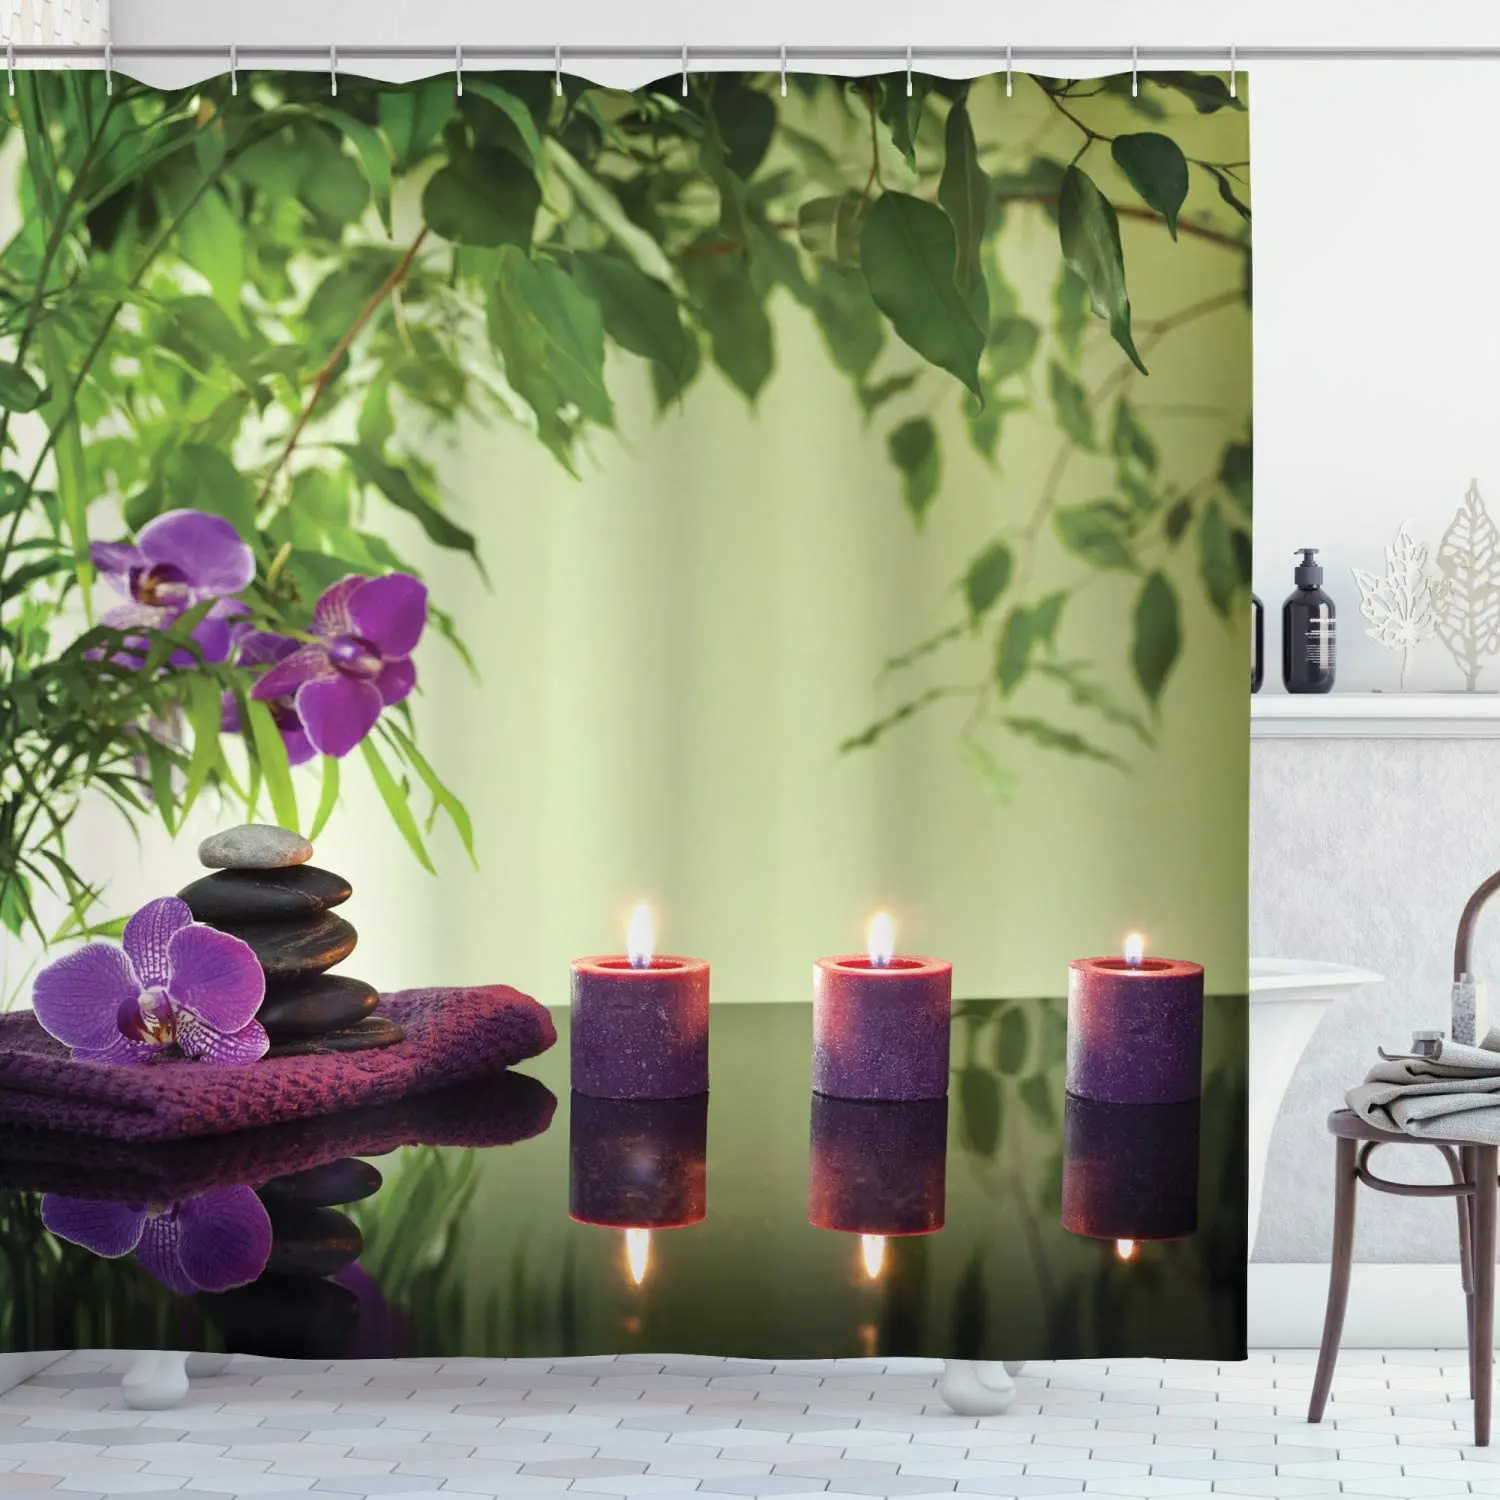 

Zen Shower Curtain Set Green Bamboo Plants Leaves Black Stone Candle Purple Orchid Spa Natural Scenery Bathroom Decor with Hooks